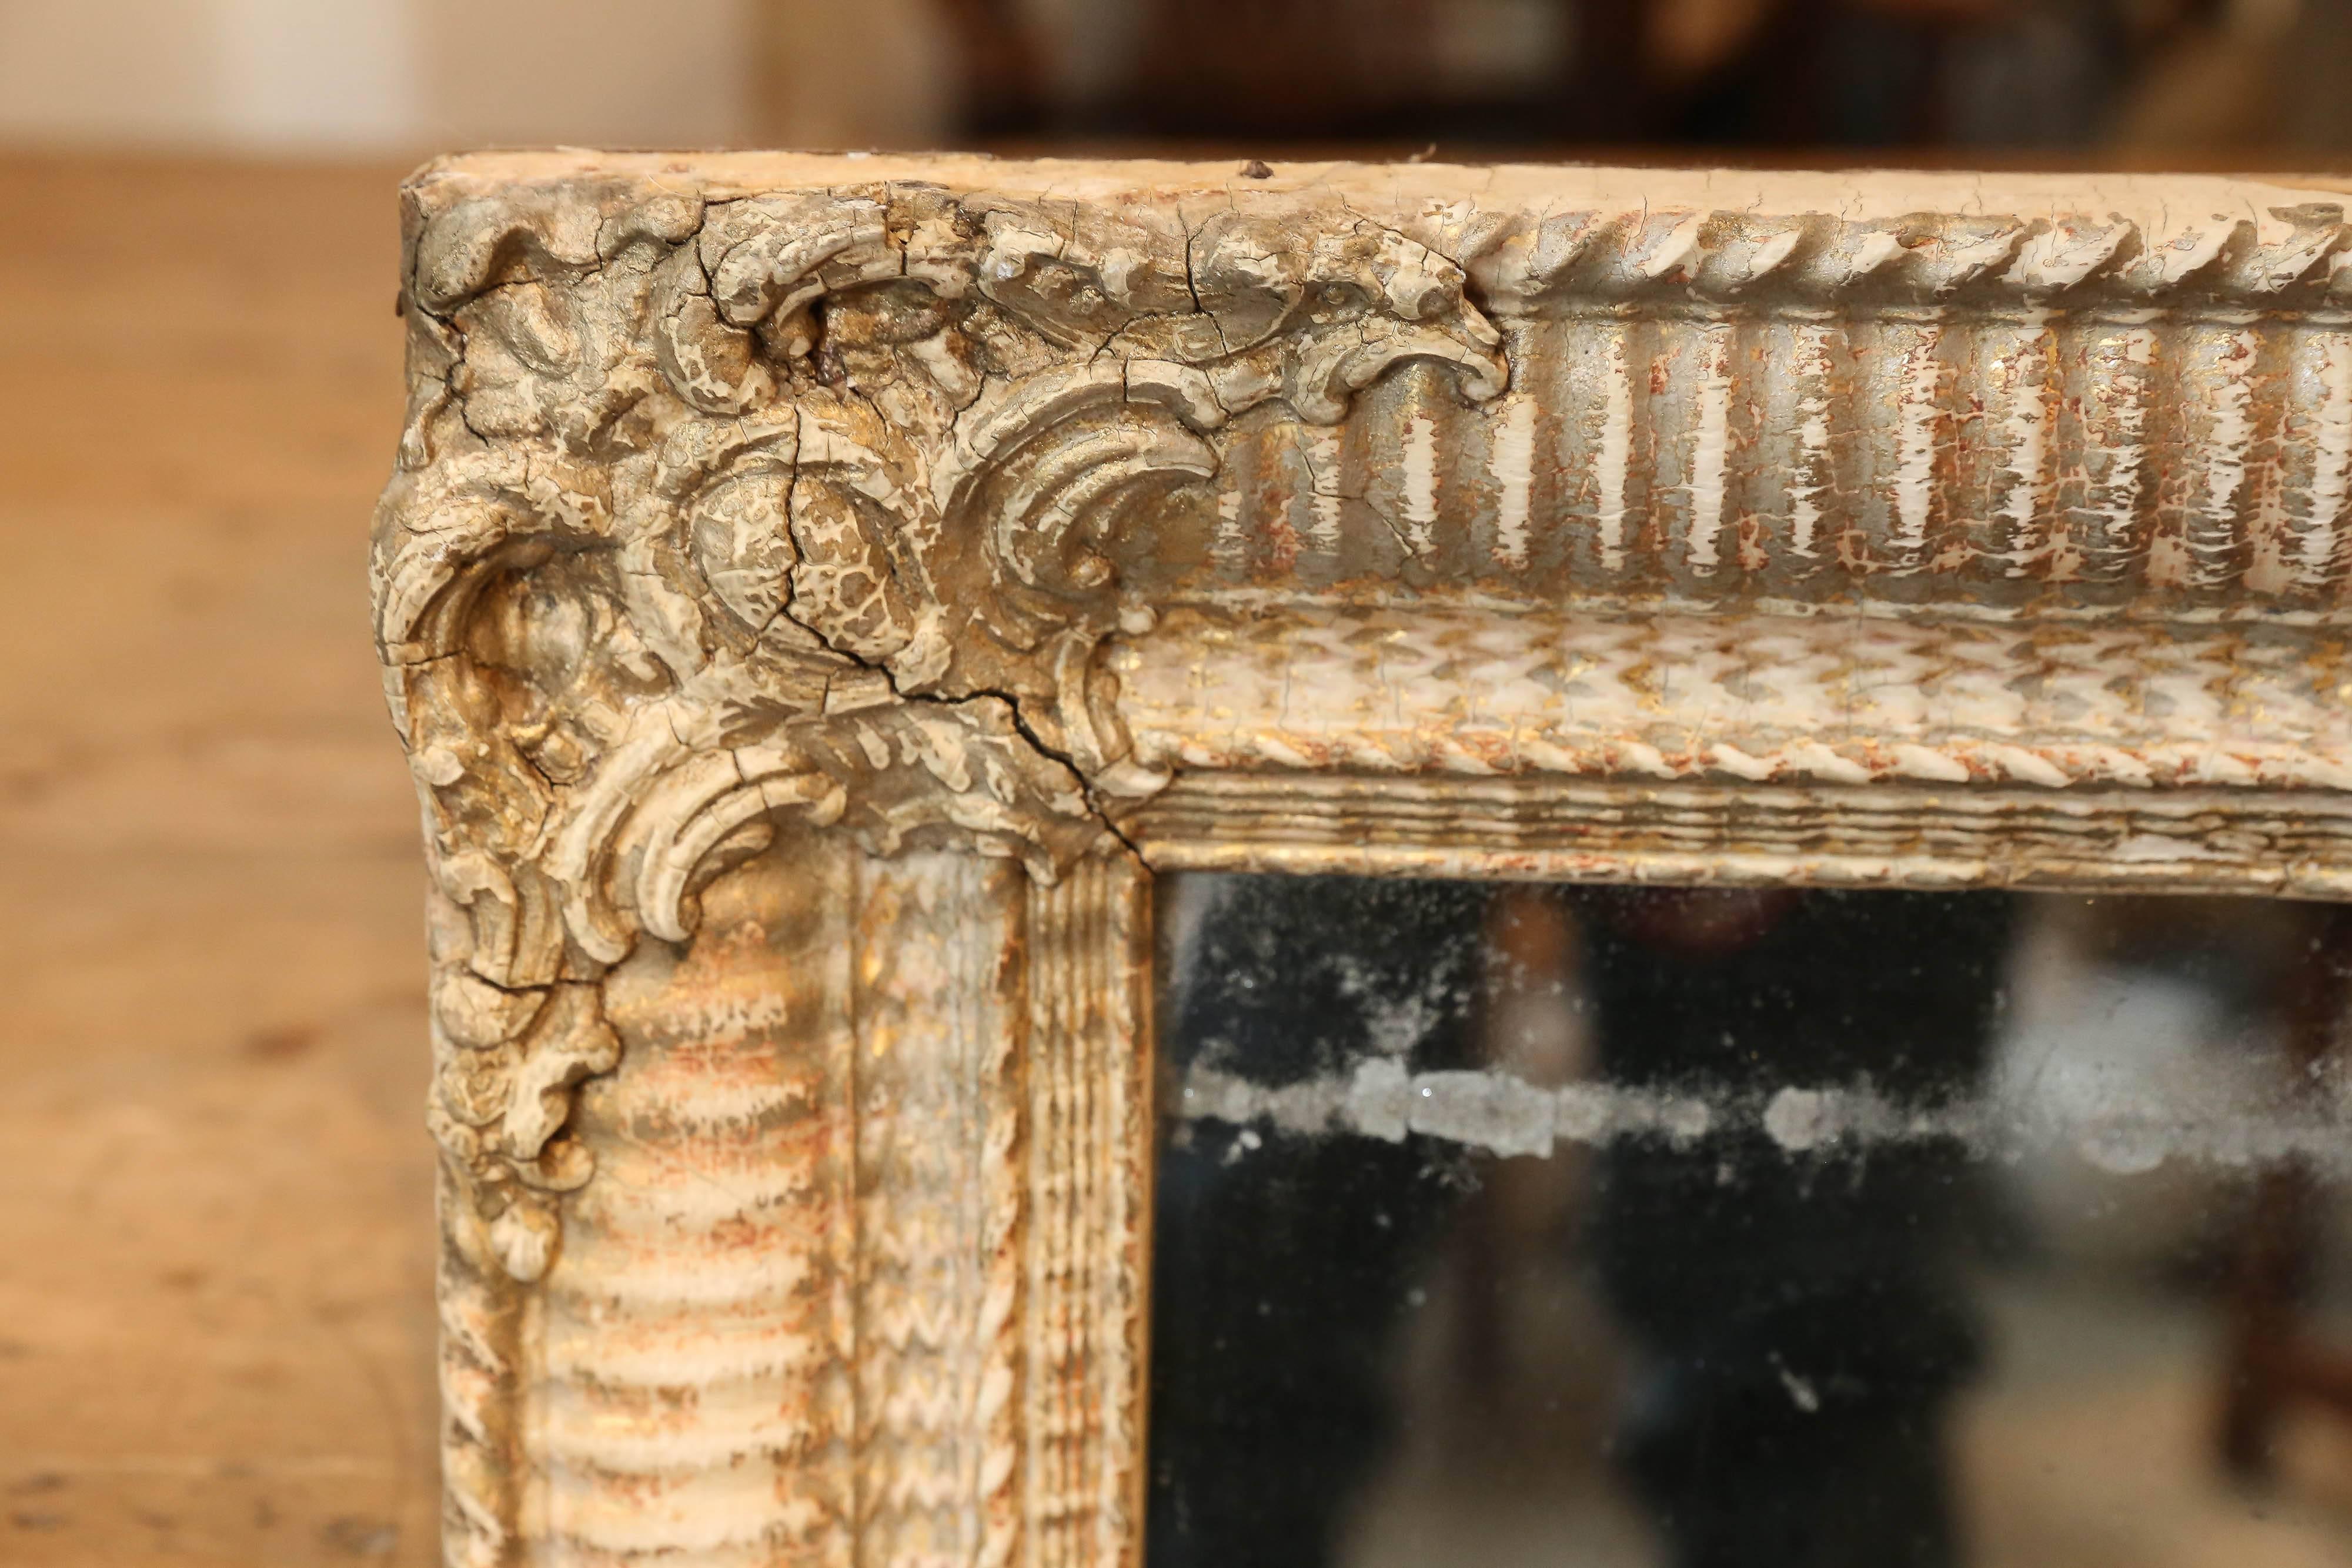 19th century Bois doré mirror with details in corner from France. Mercury glass. Can be hung horizontally or vertically.